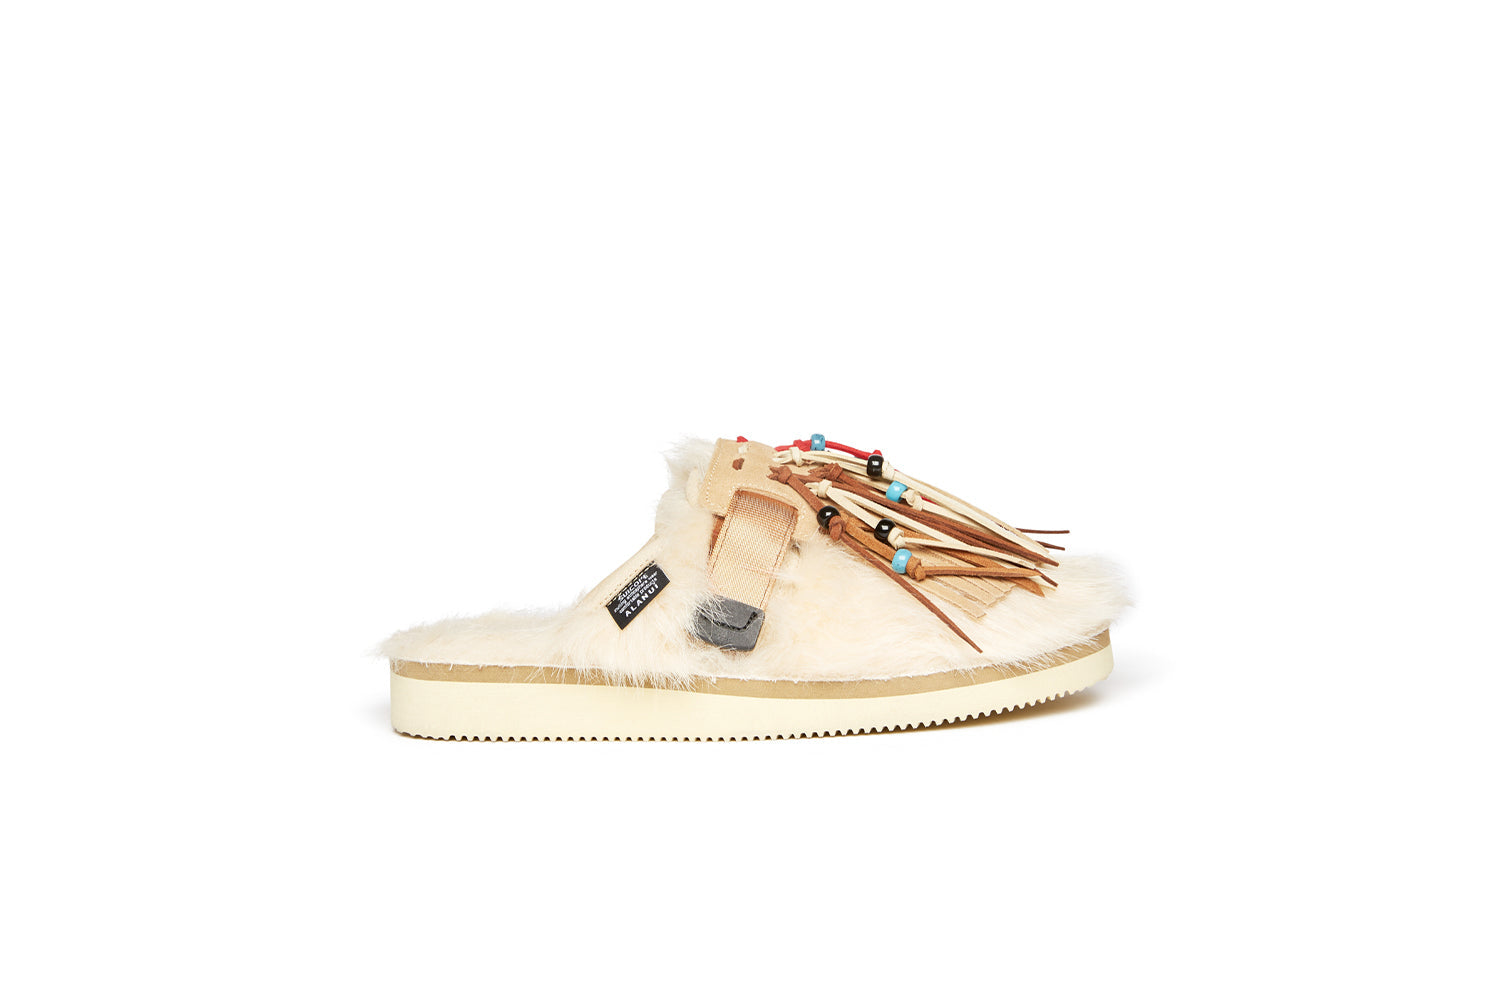 Alanui edition SUICOKE Zavo closed toe slides with ivory colored fur on the upper and footbed. Includes a beige and ivory suede-beaded fringe that is a detachable piece from the singular nylon strap across the upper. From Fall/Winter 2021 collection on SUICOKE Official US &amp; Canada Webstore.